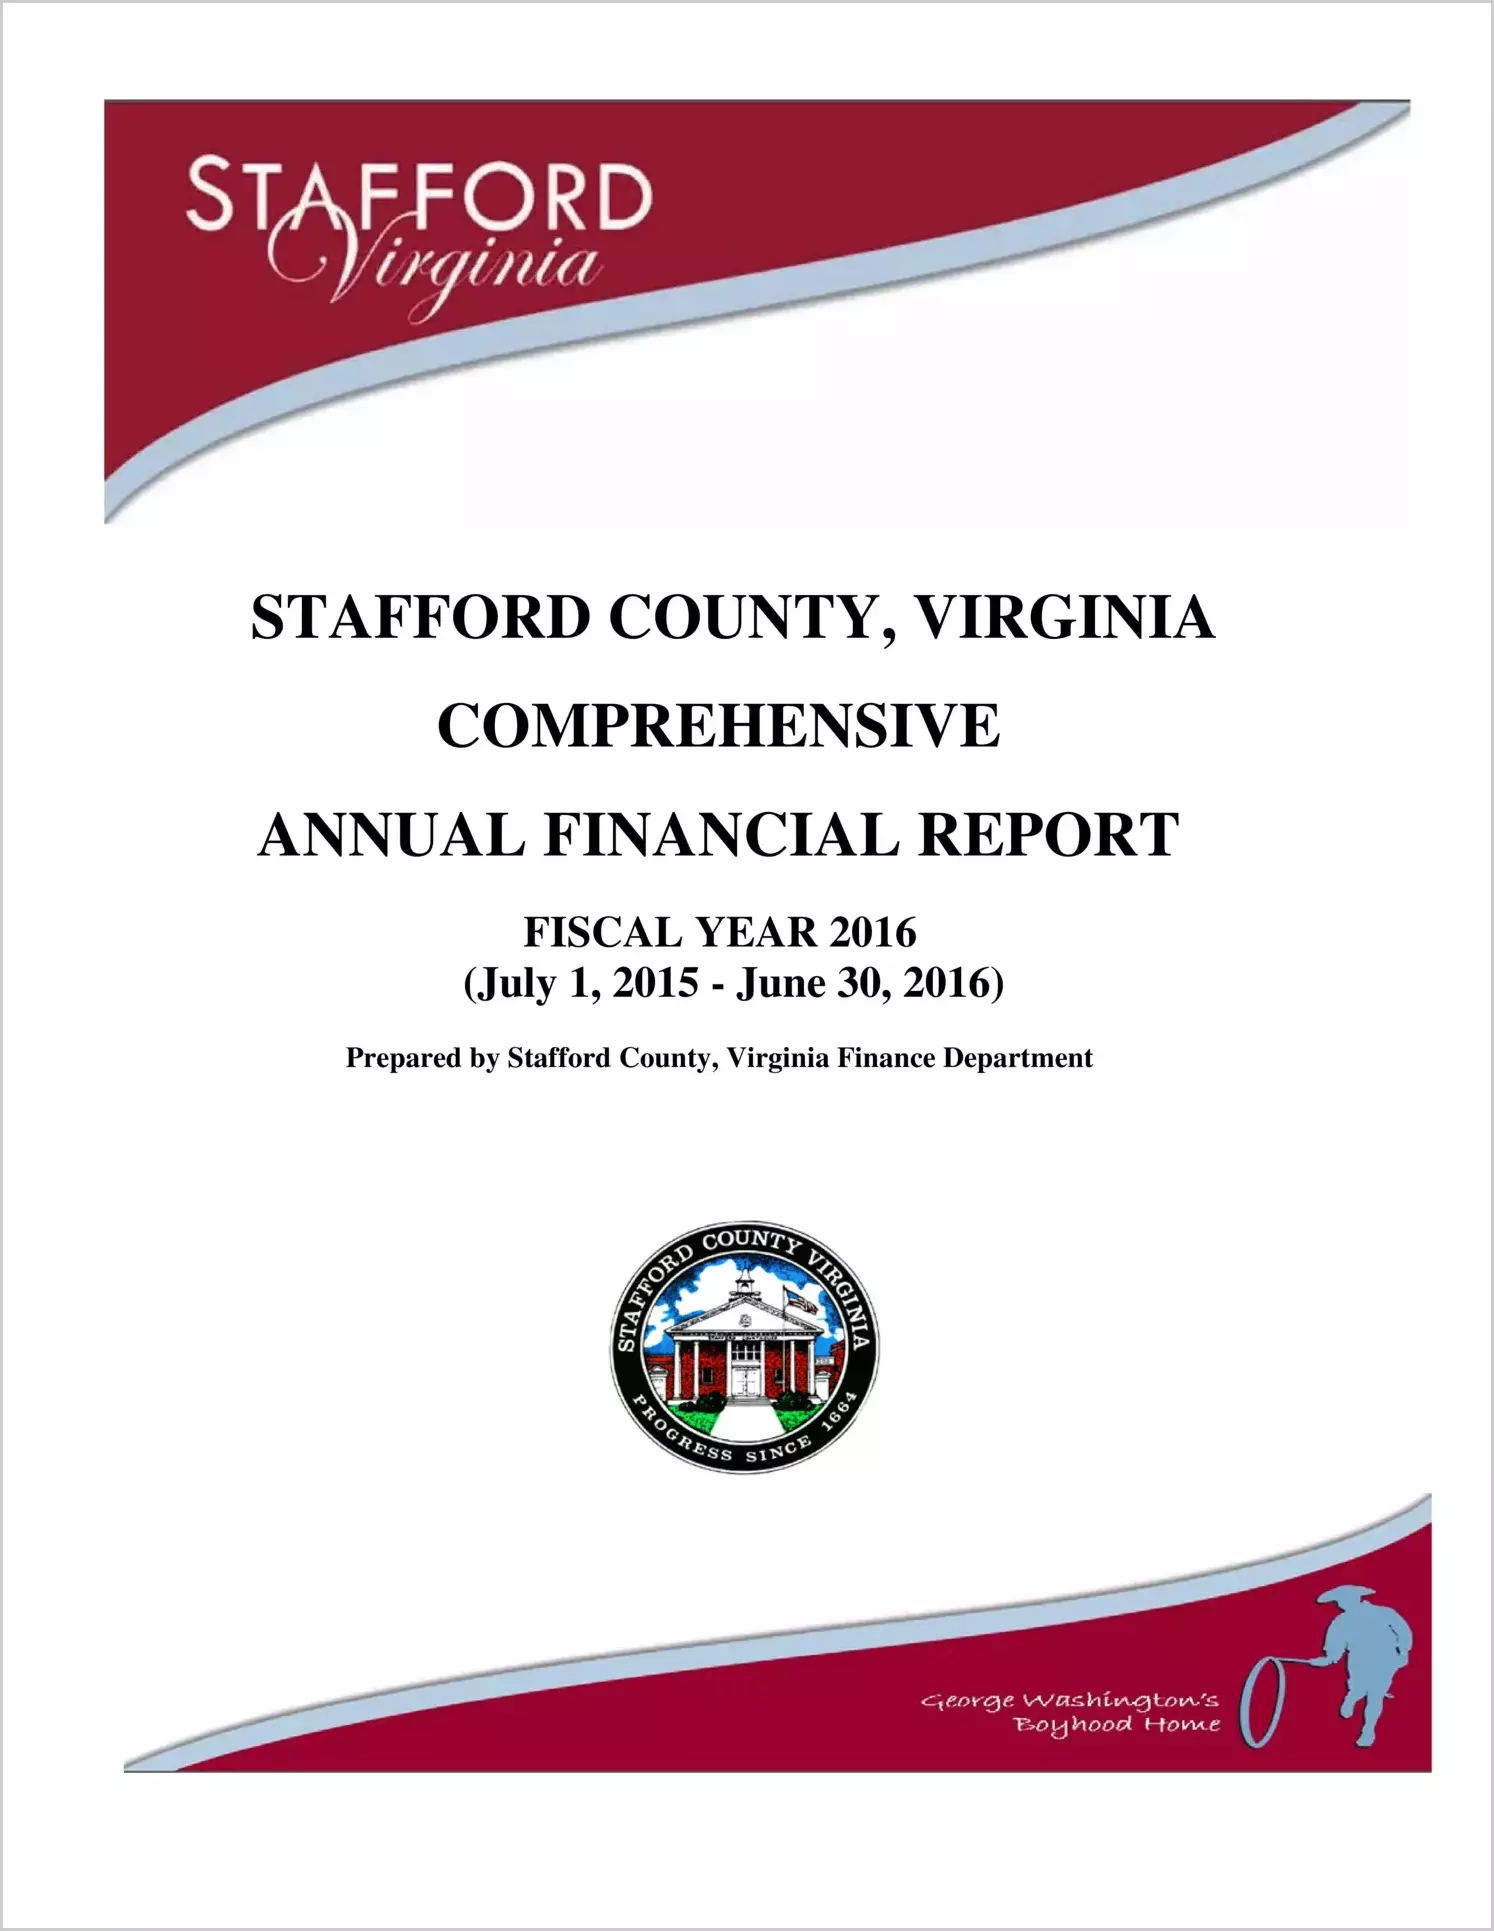 2016 Annual Financial Report for County of Stafford